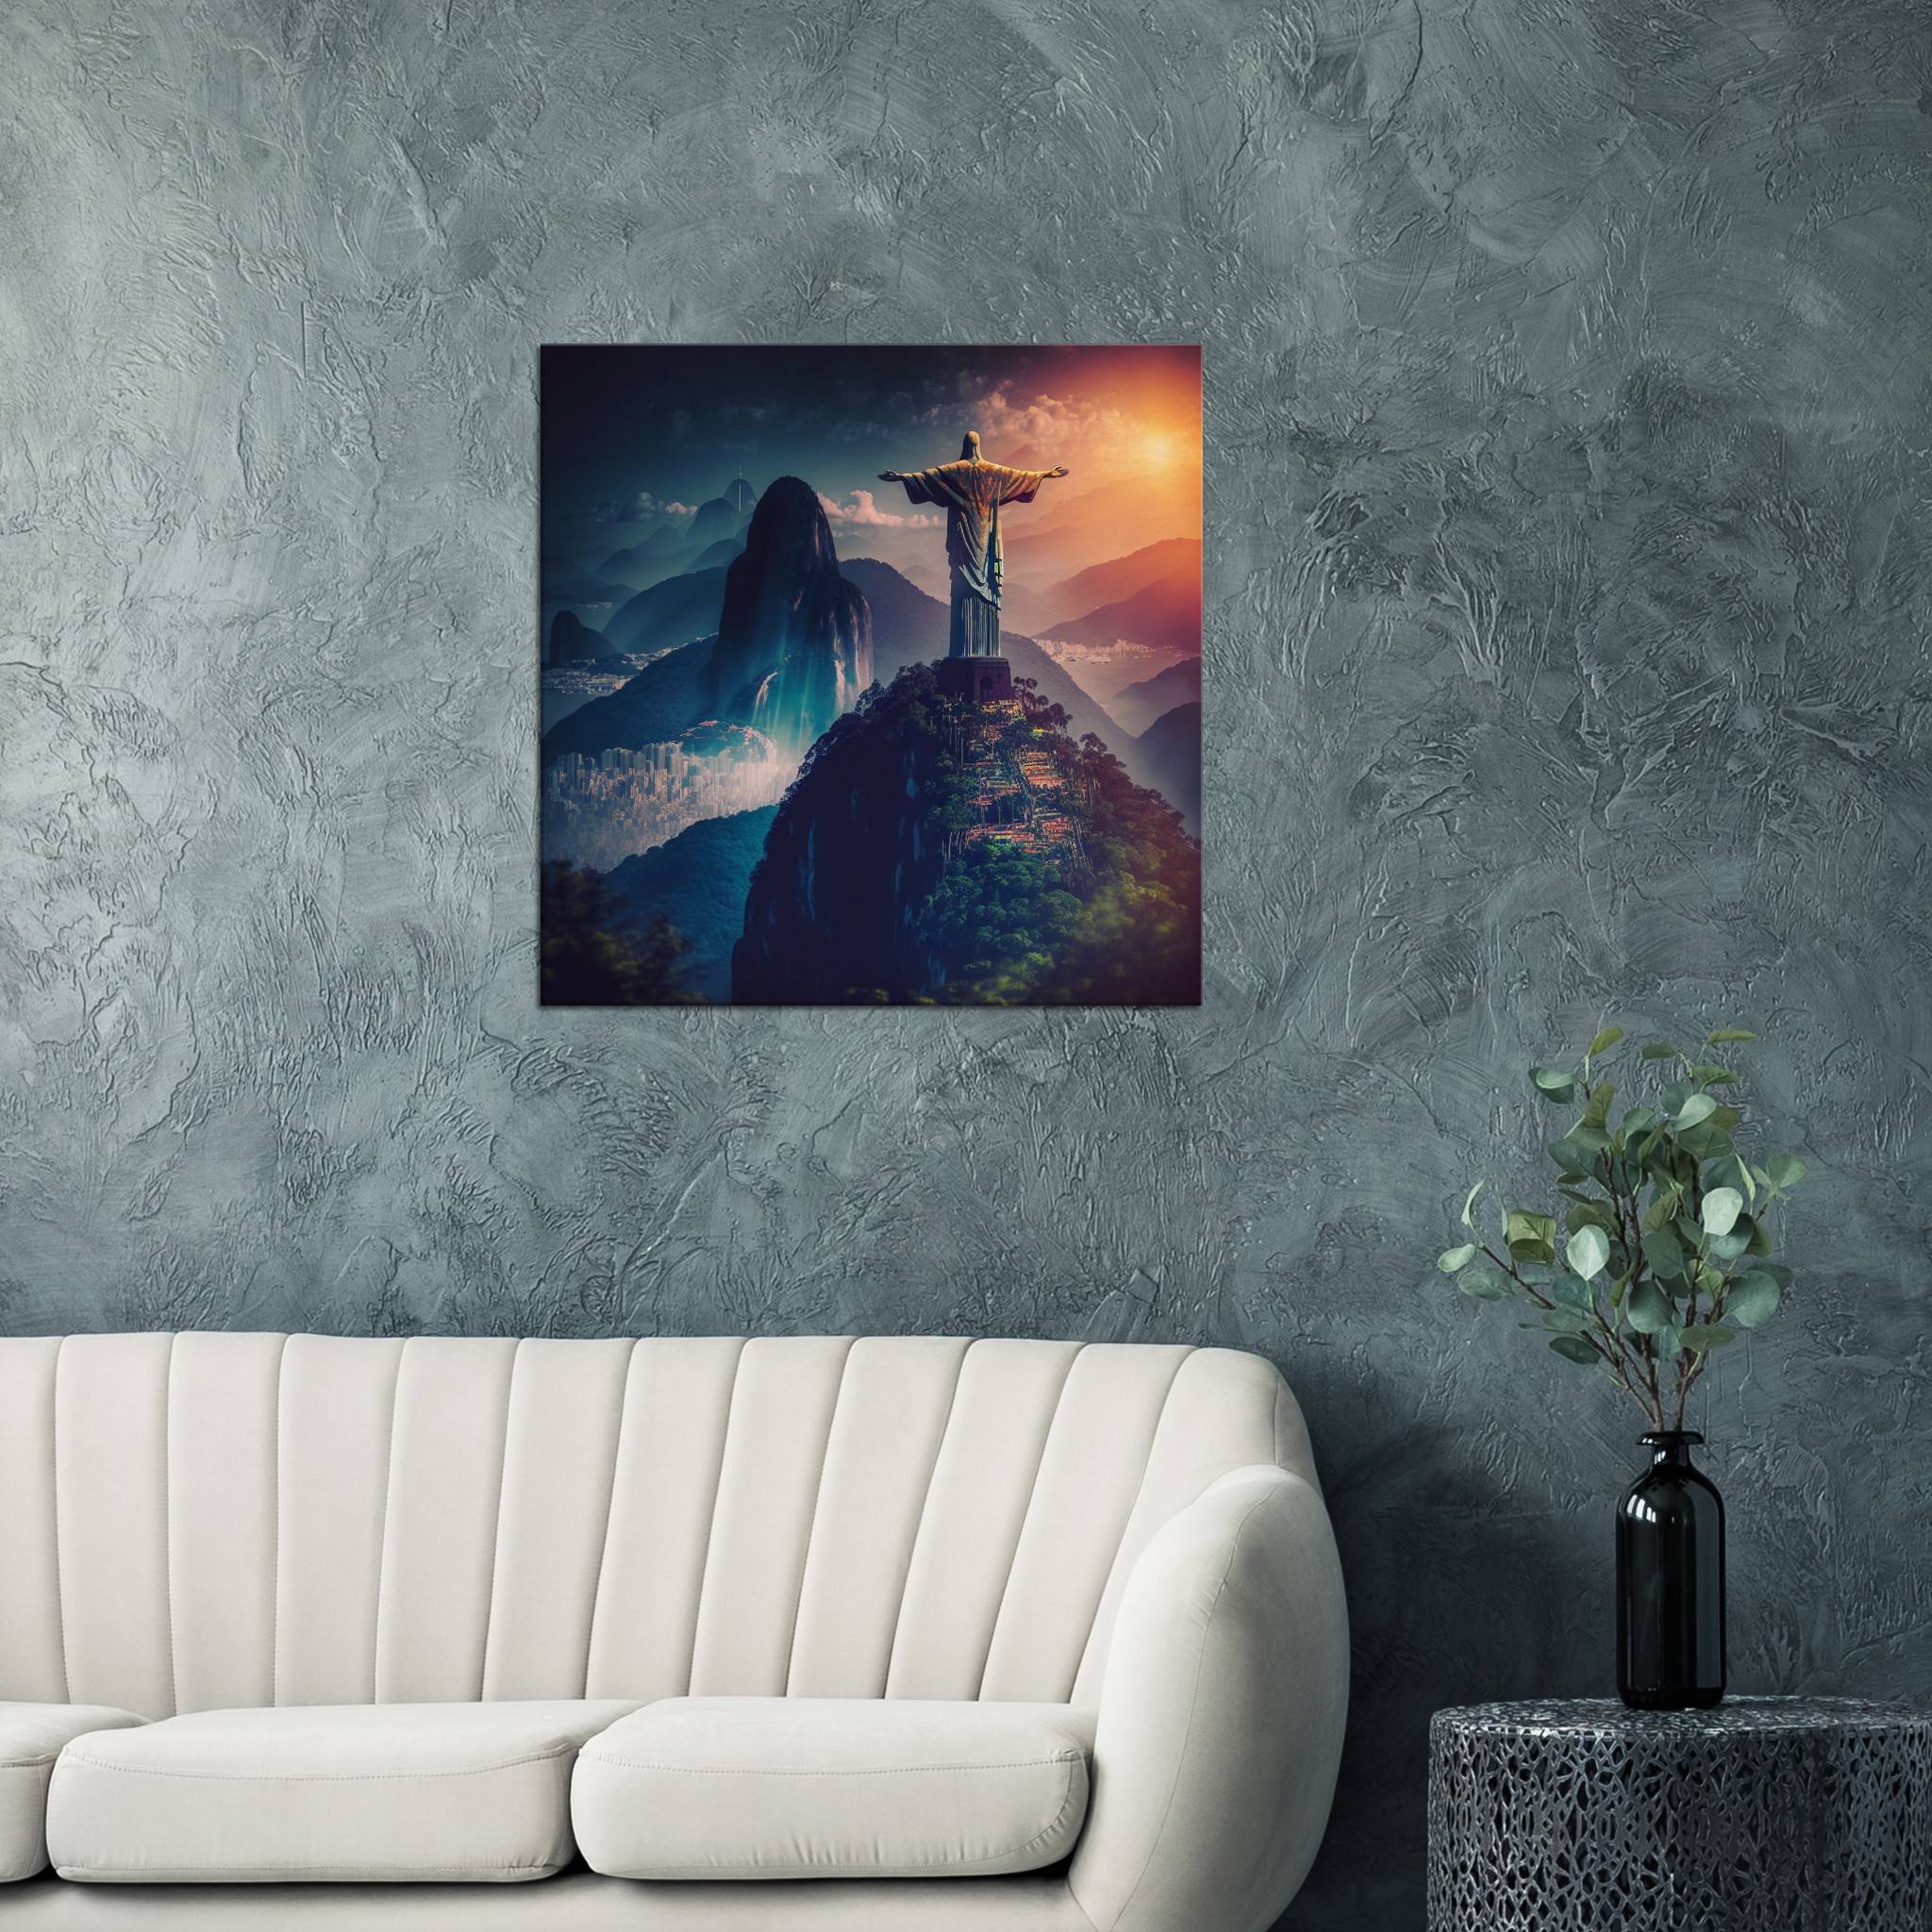 Christ the Redeemer 5 / 60 x 60cm (Canvas Print) Canvas Print Canvas reproduction The Pianist Print On Demand Fabled Gallery https://fabledgallery.art/product/christ-the-redeemer-5-60-x-60cm-canvas-print/